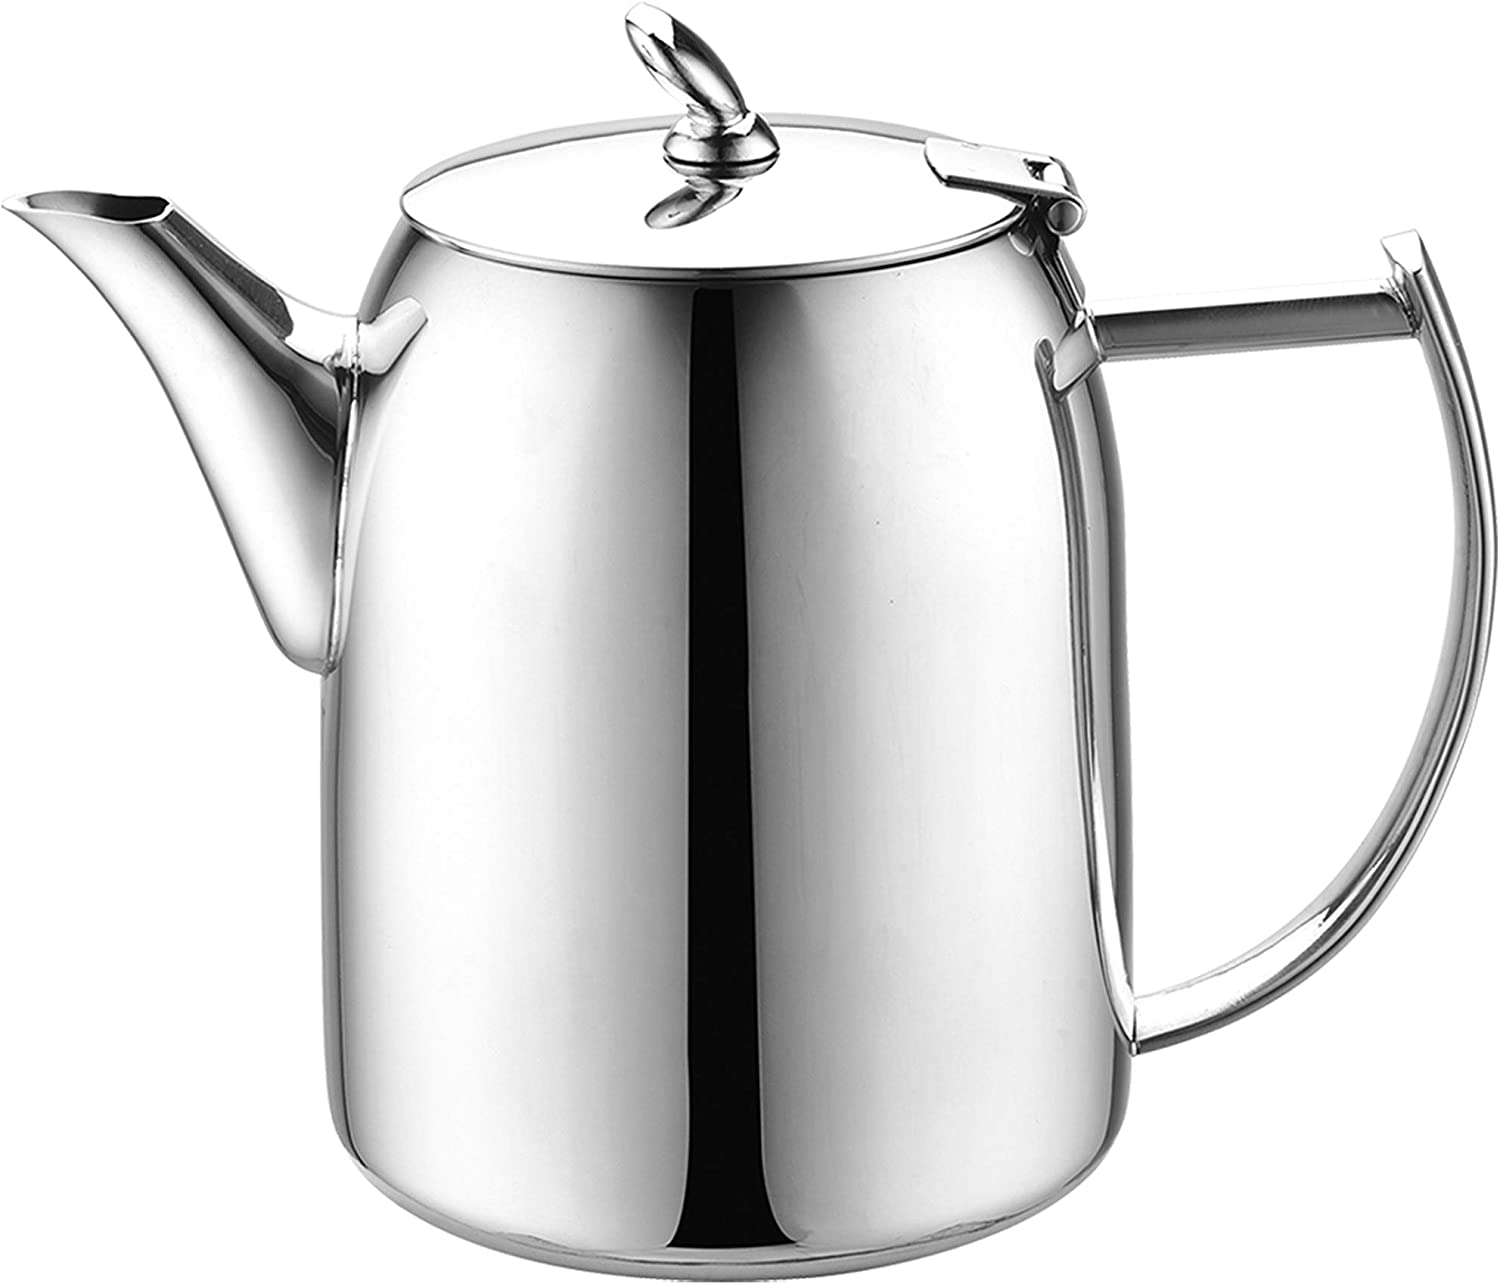 Cafe Ole Café Olé CHC-020 Chatsworth Coffee Pot with Unique Lid Made of High Quality 18/10 Stainless Steel - High Gloss Polish, 20oz, 0.57L, Drip Free Casting, Stainless Steel